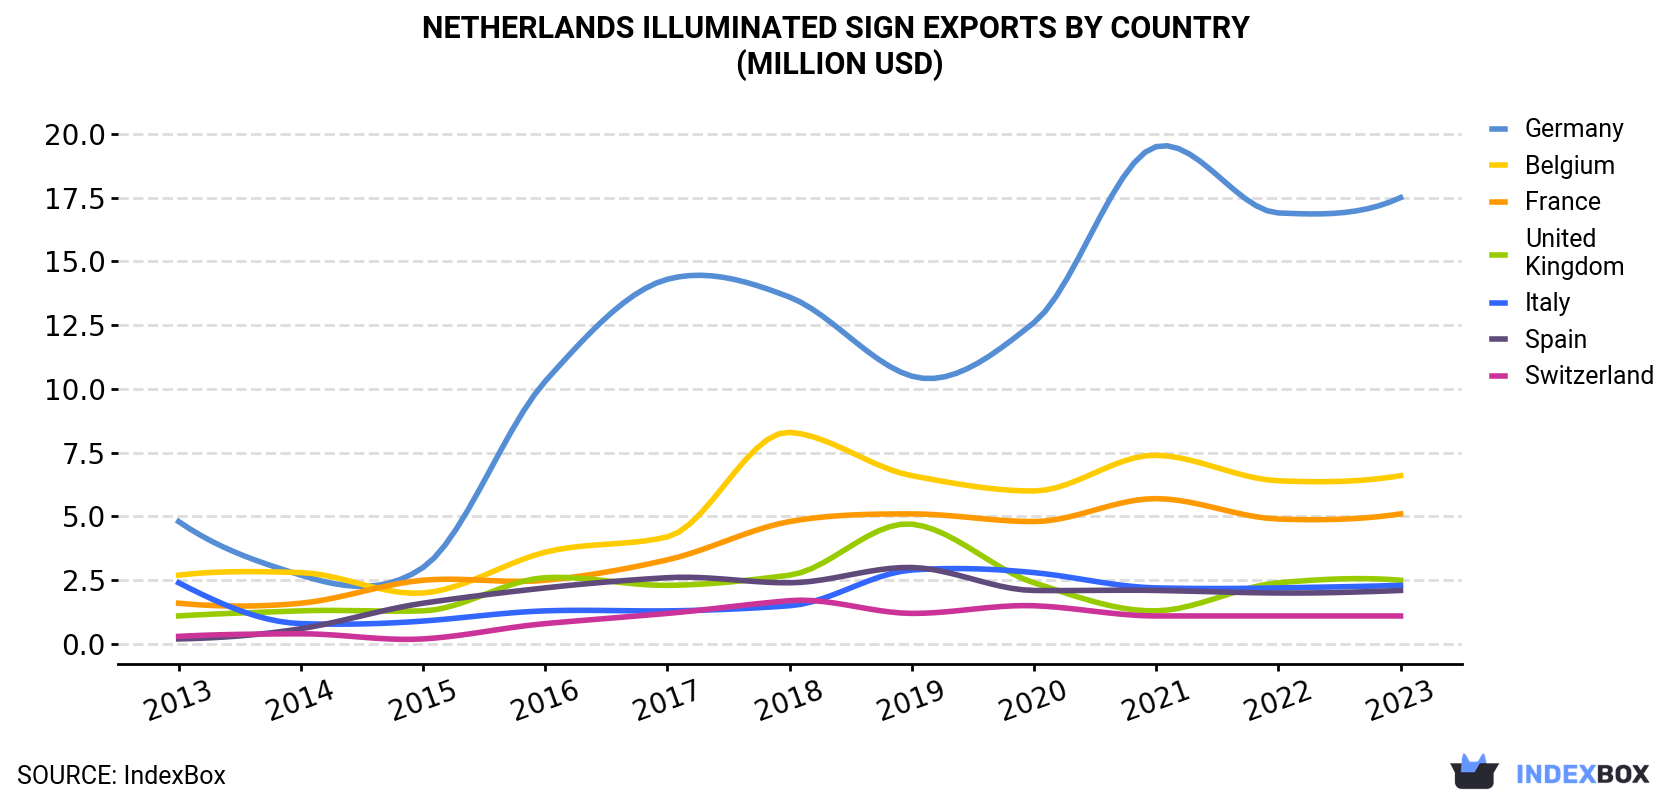 Netherlands Illuminated Sign Exports By Country (Million USD)